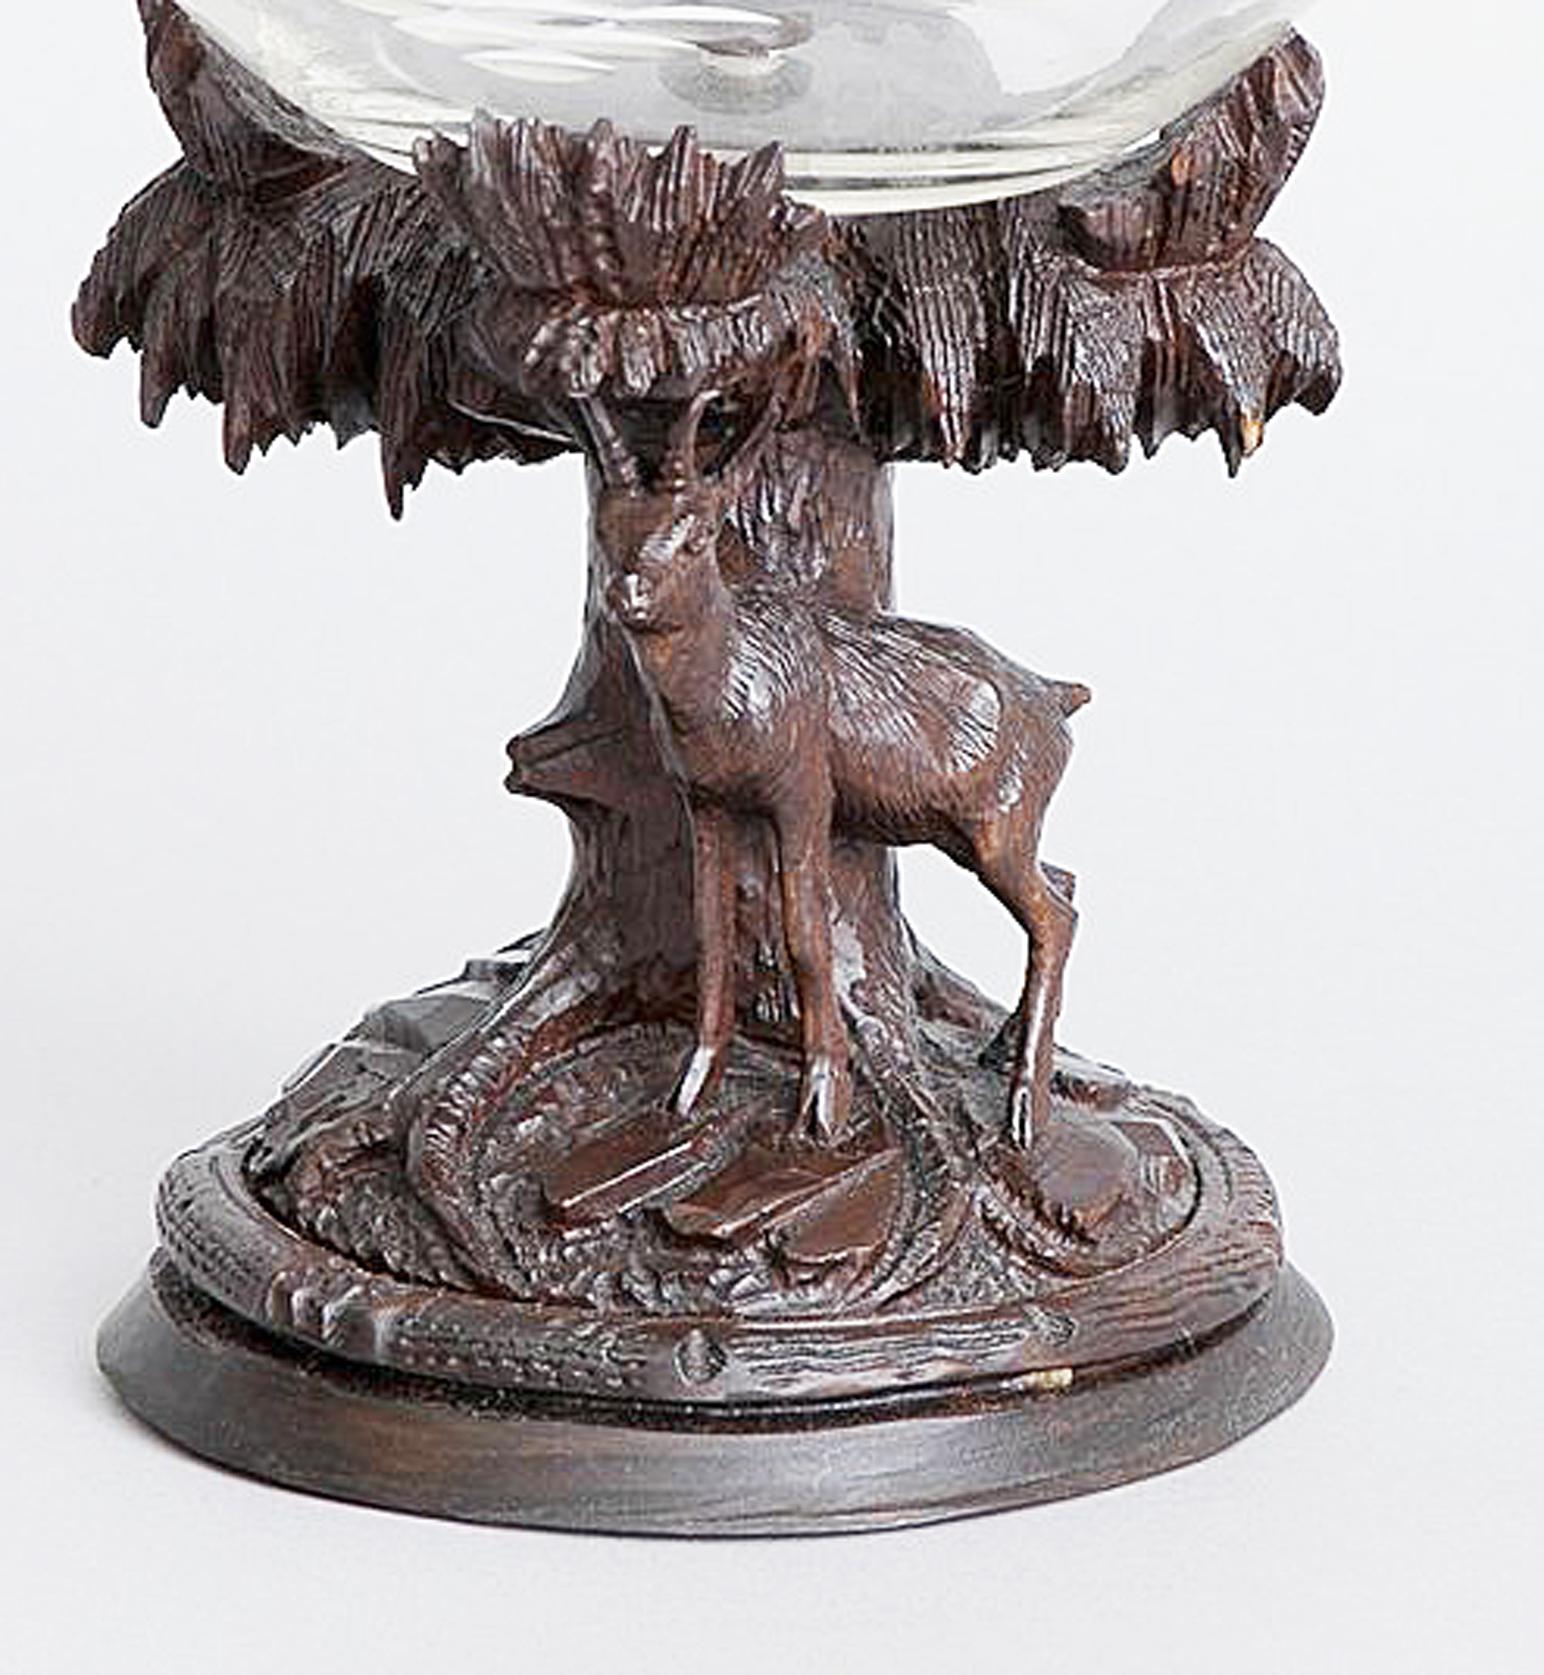 Swiss Black Forest carved linden wood and cut glass compote,
Marked Gewidmet Von Turnverein/ Meiringen,
circa 1890-1900.

The Black Forest compote is in two sections- a glass bowl secured with a shaped linden wood button CAP and a linden wood